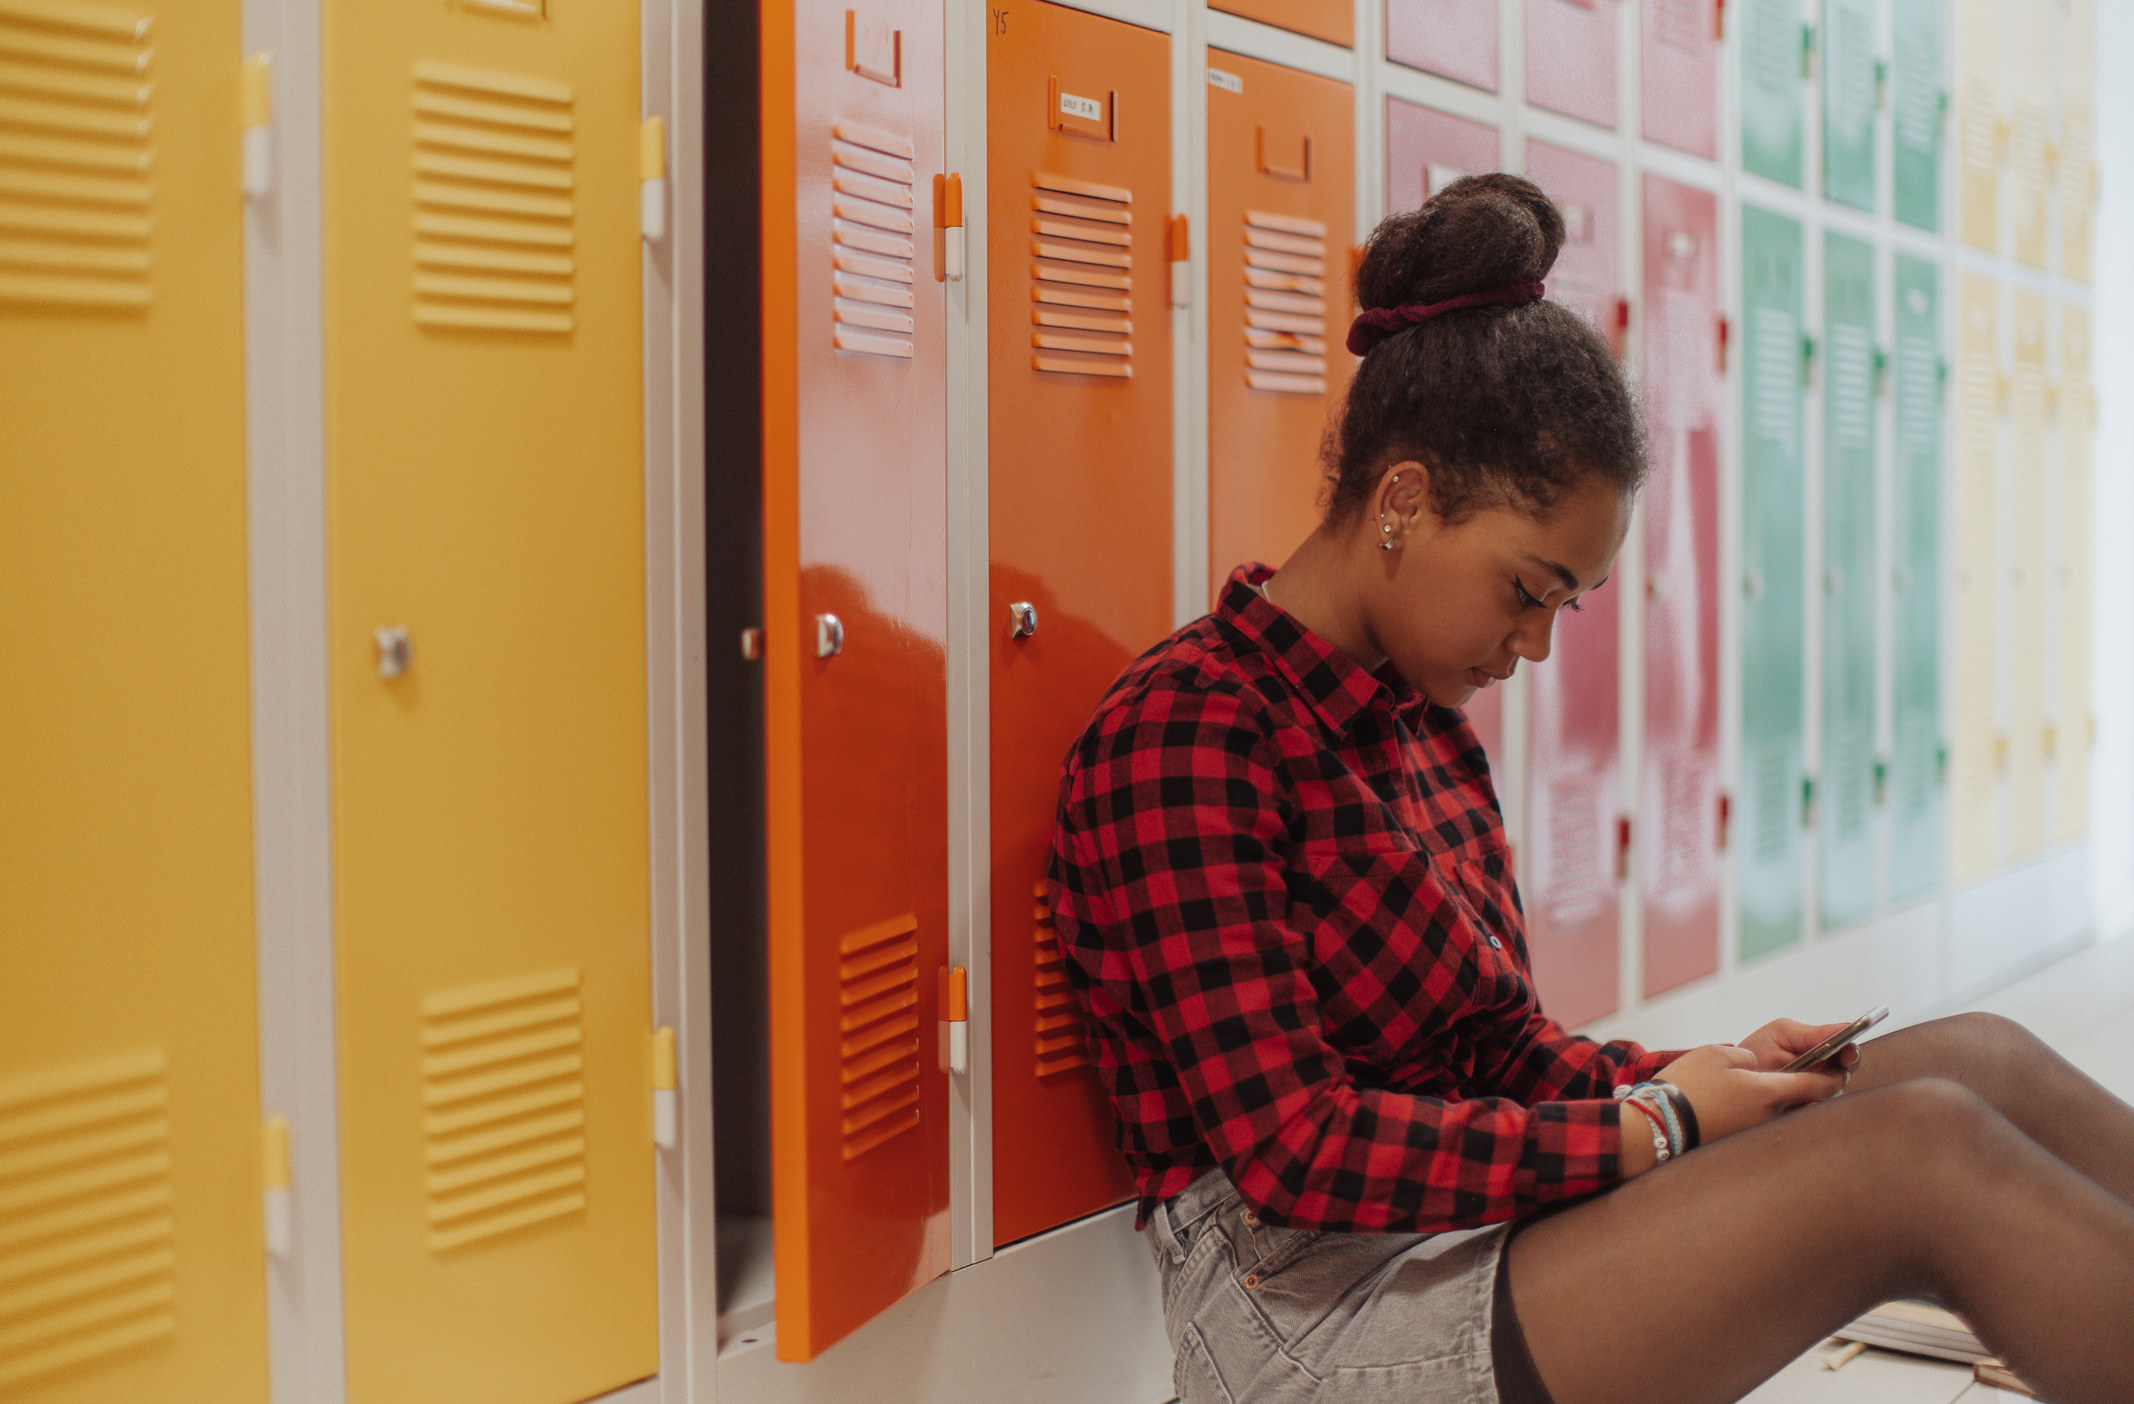 A girl sitting on the ground in front of lockers on her phone